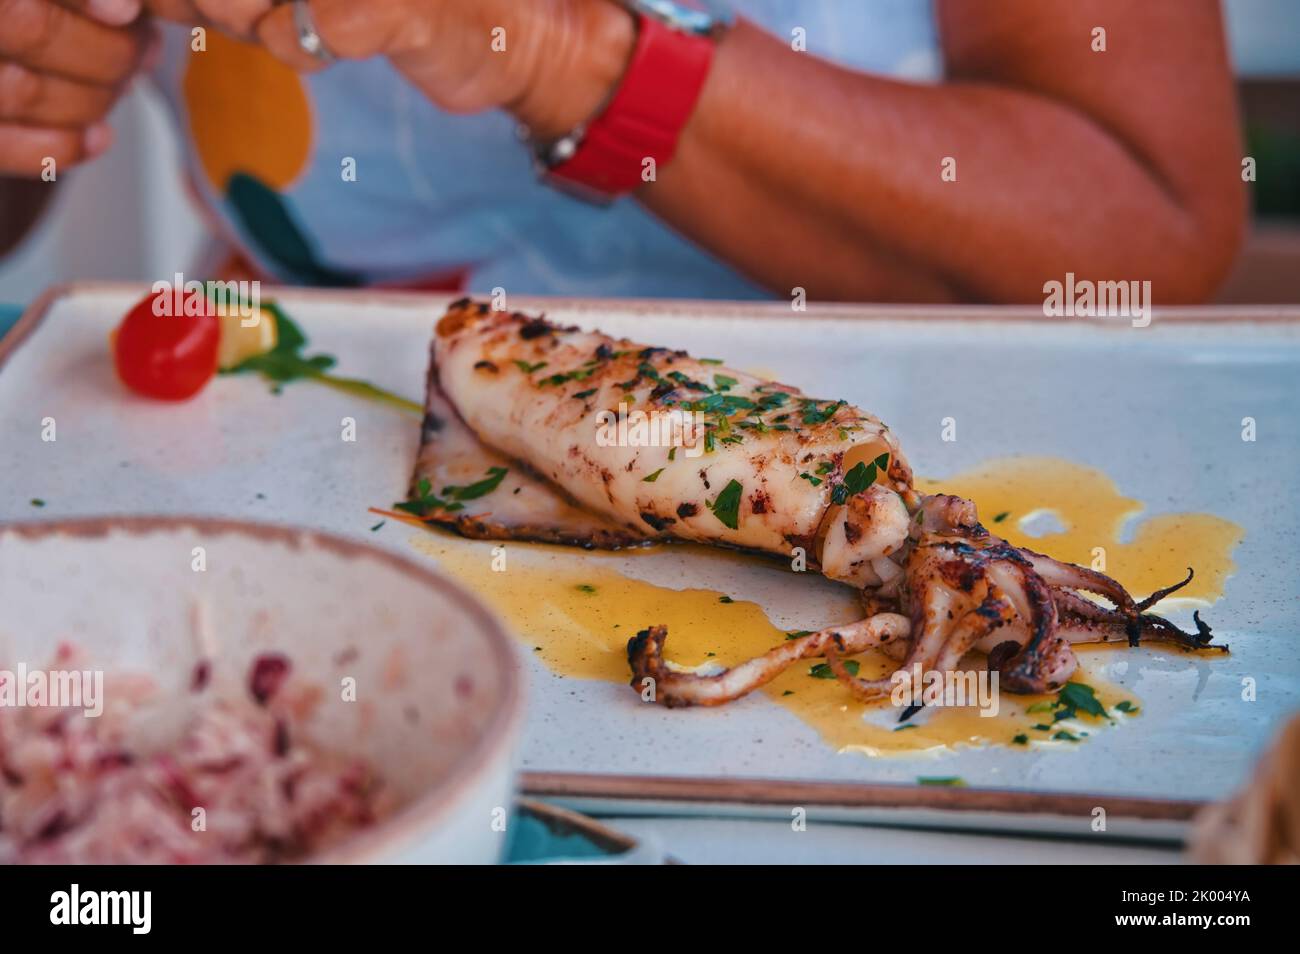 Calamari served on the table in restaurant Stock Photo